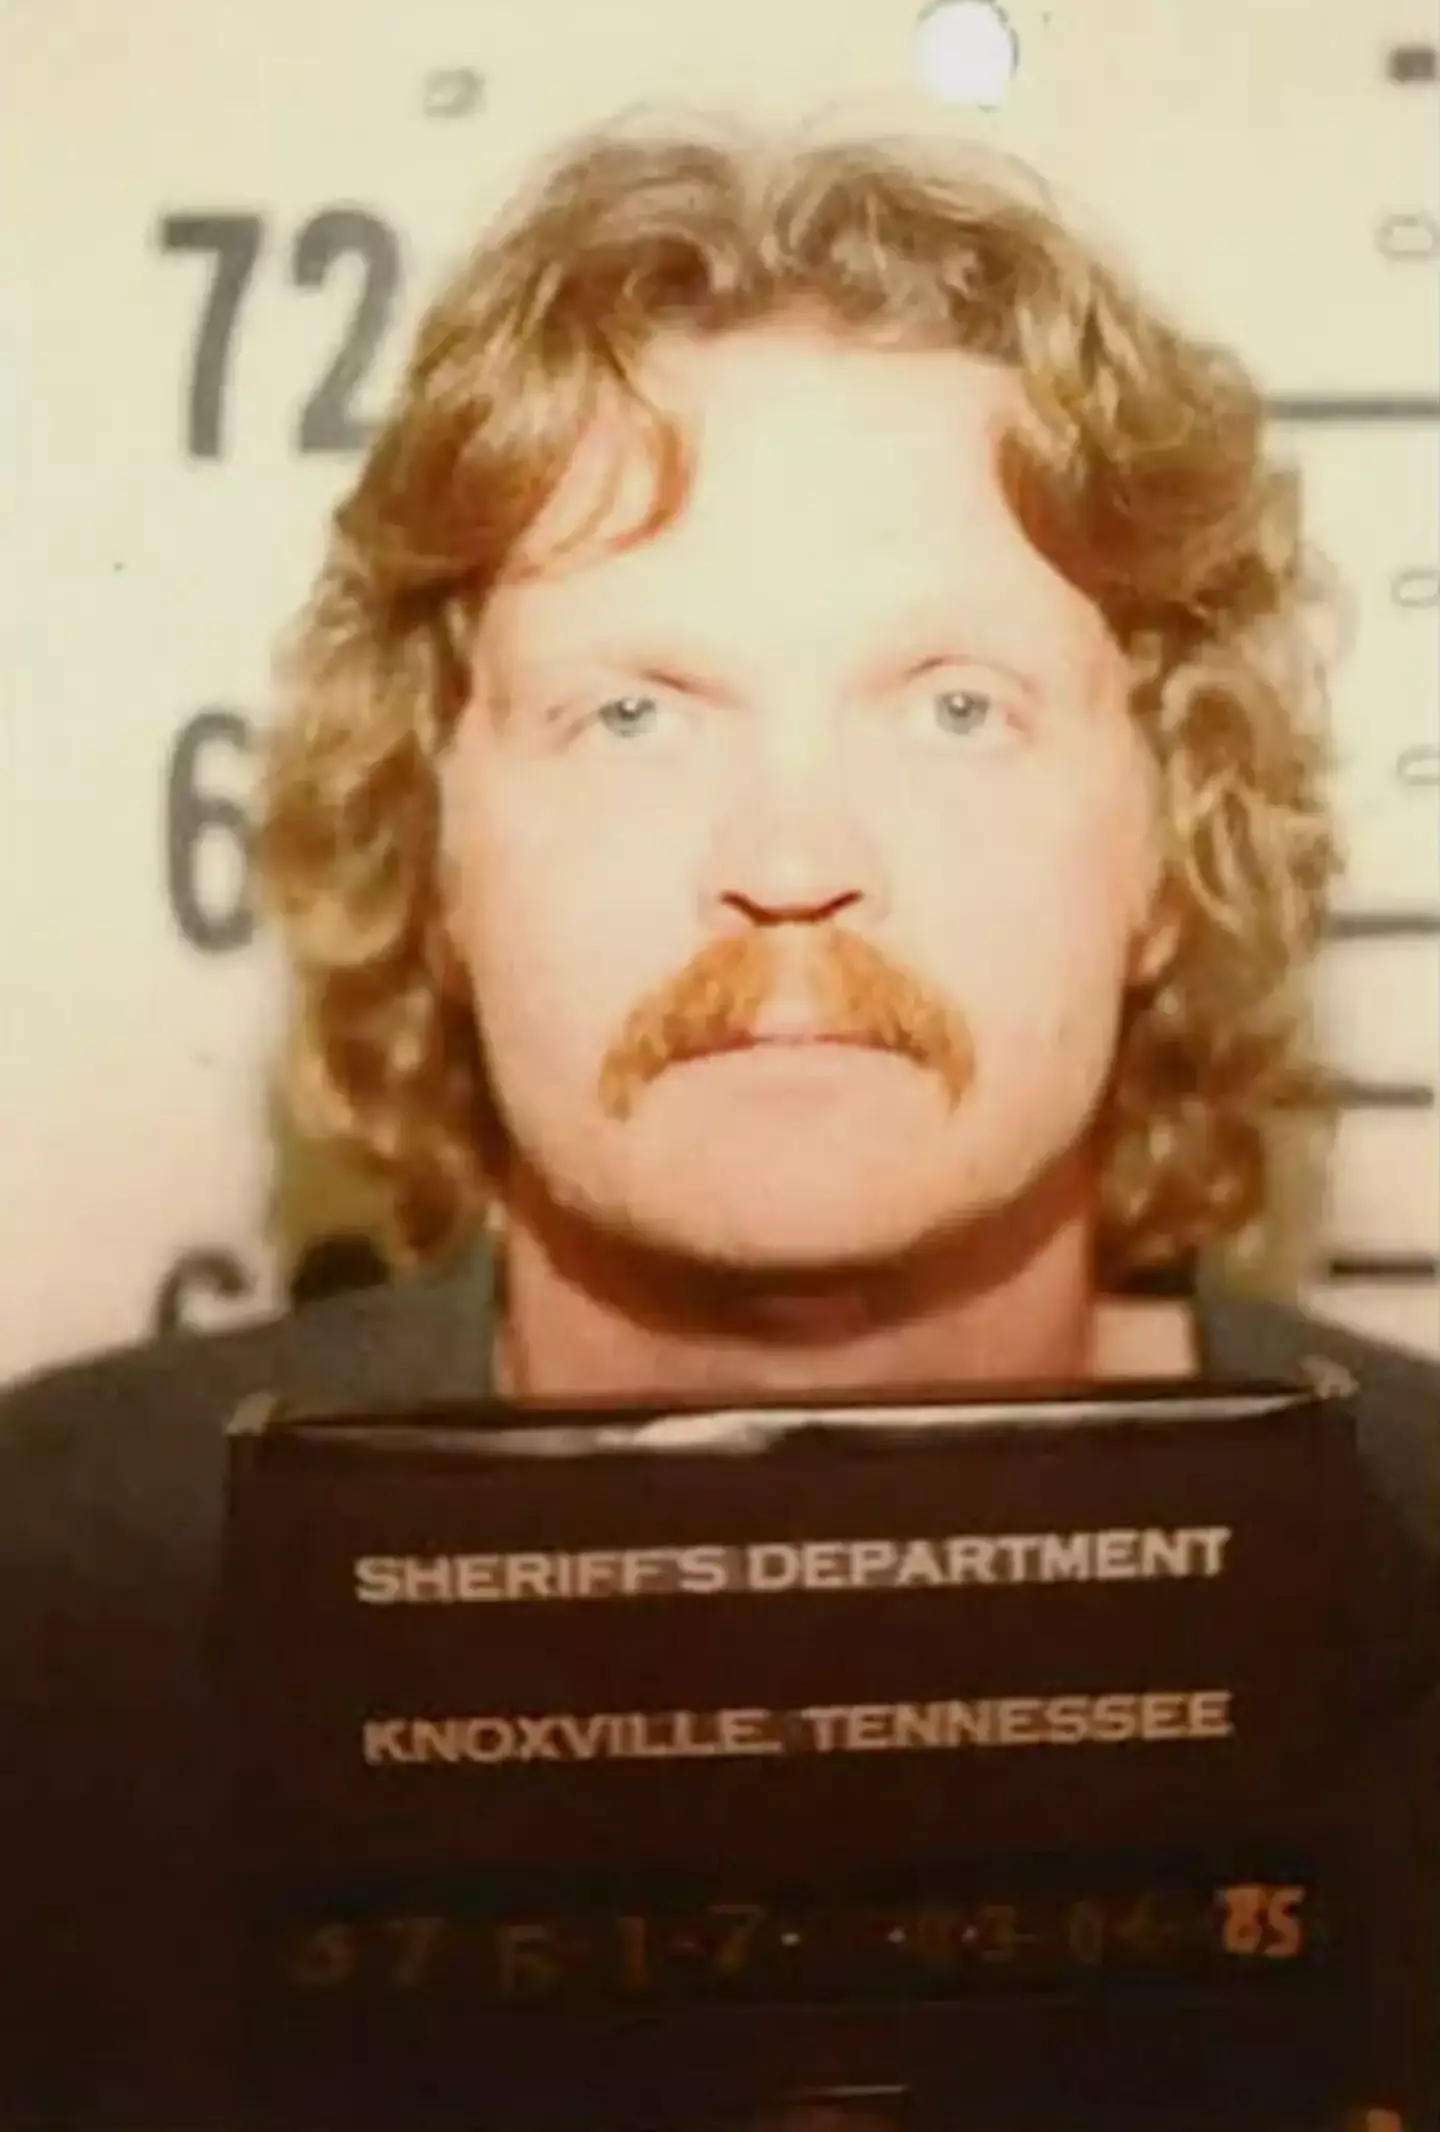 Jerry Johns died in prison in 2015 after being found guilty of strangling a prostitute in Knox County, Kentucky.